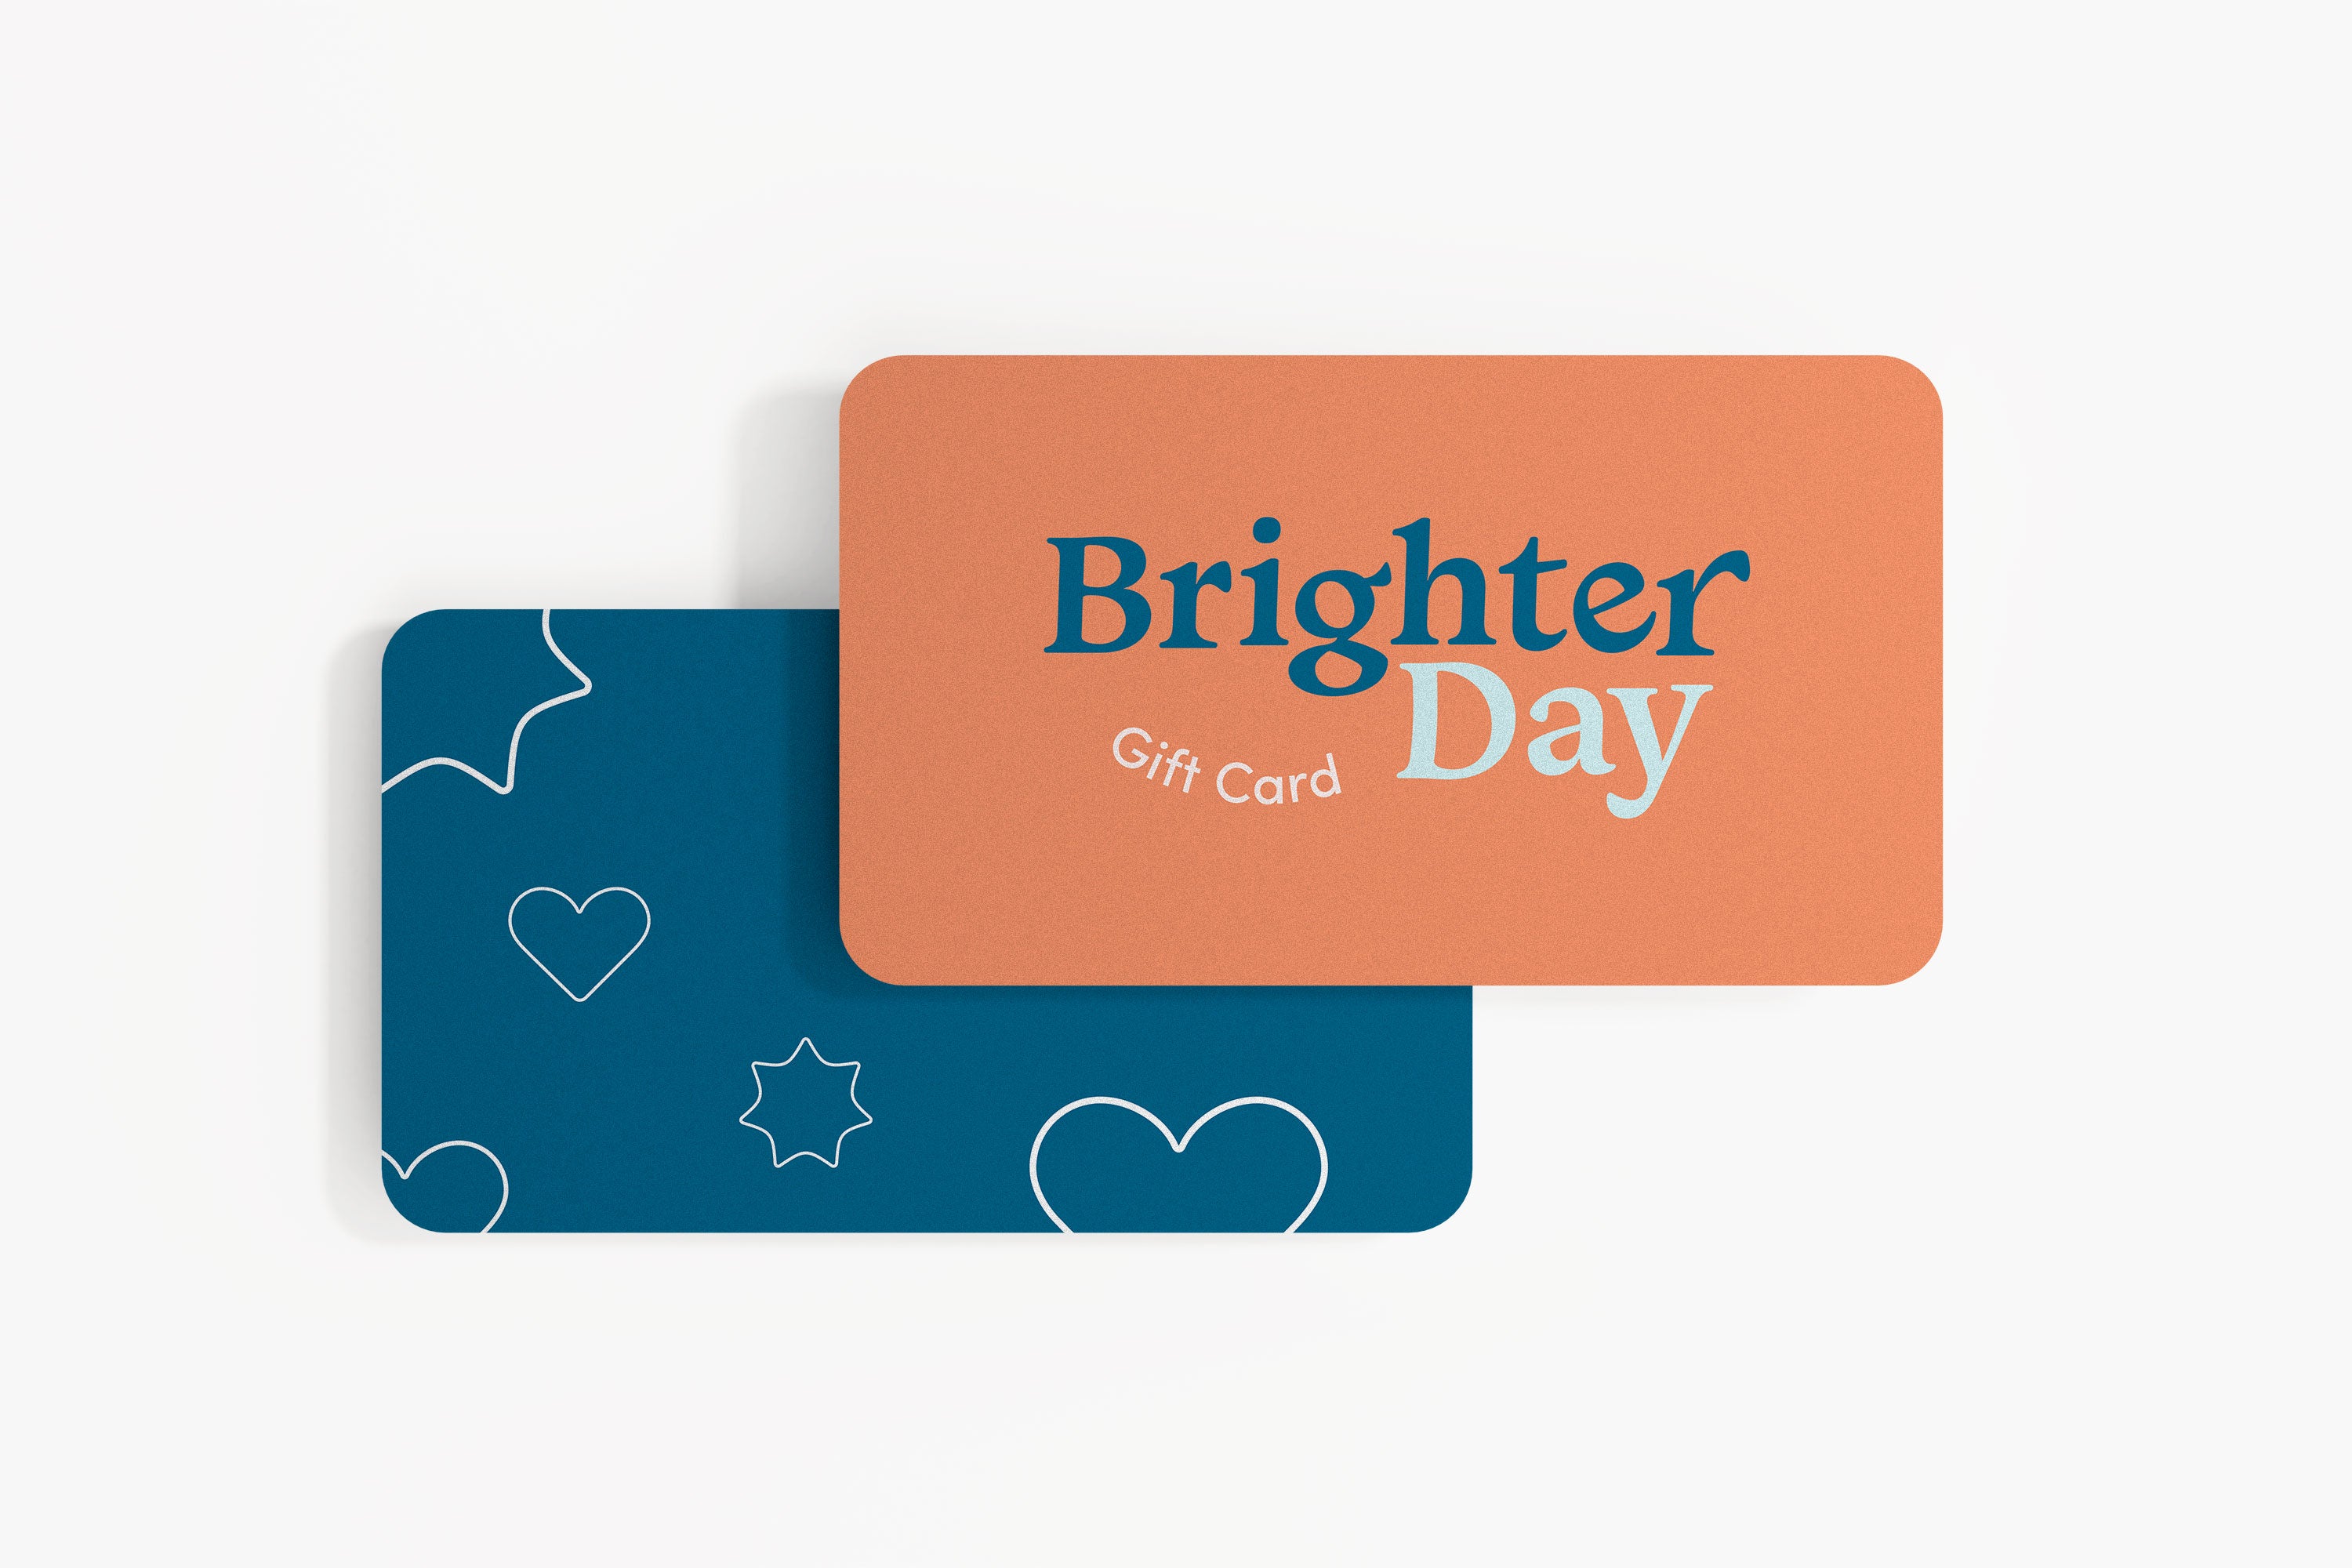 Orange Brighter Day gift card with Navy reverse side